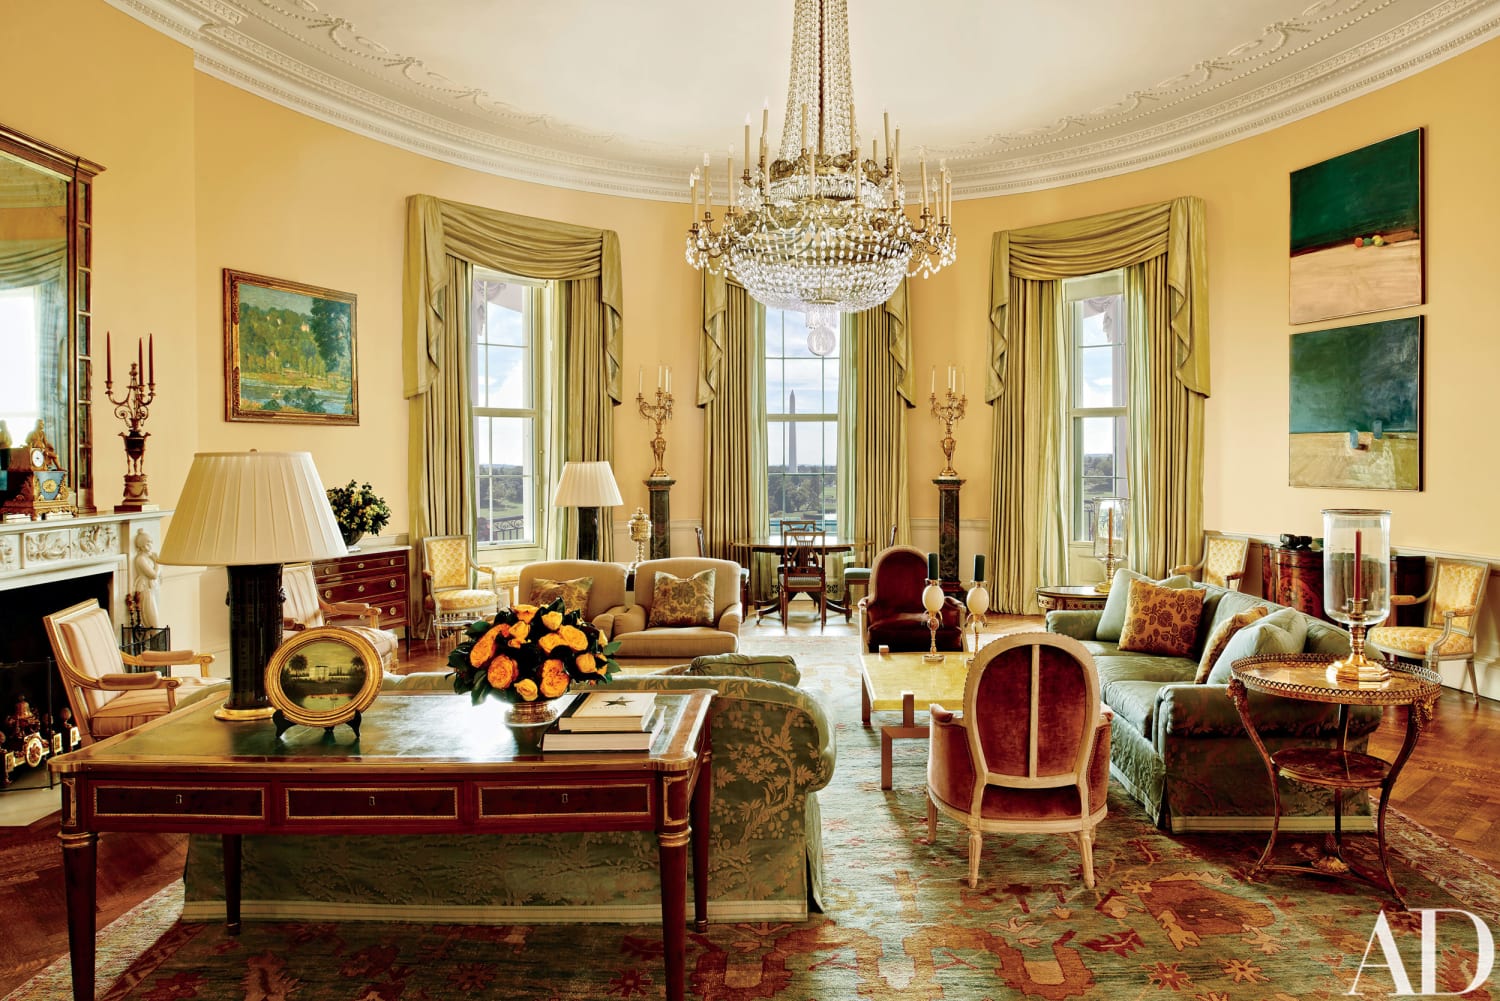 Look Inside the Obamas' Stylish White House Home